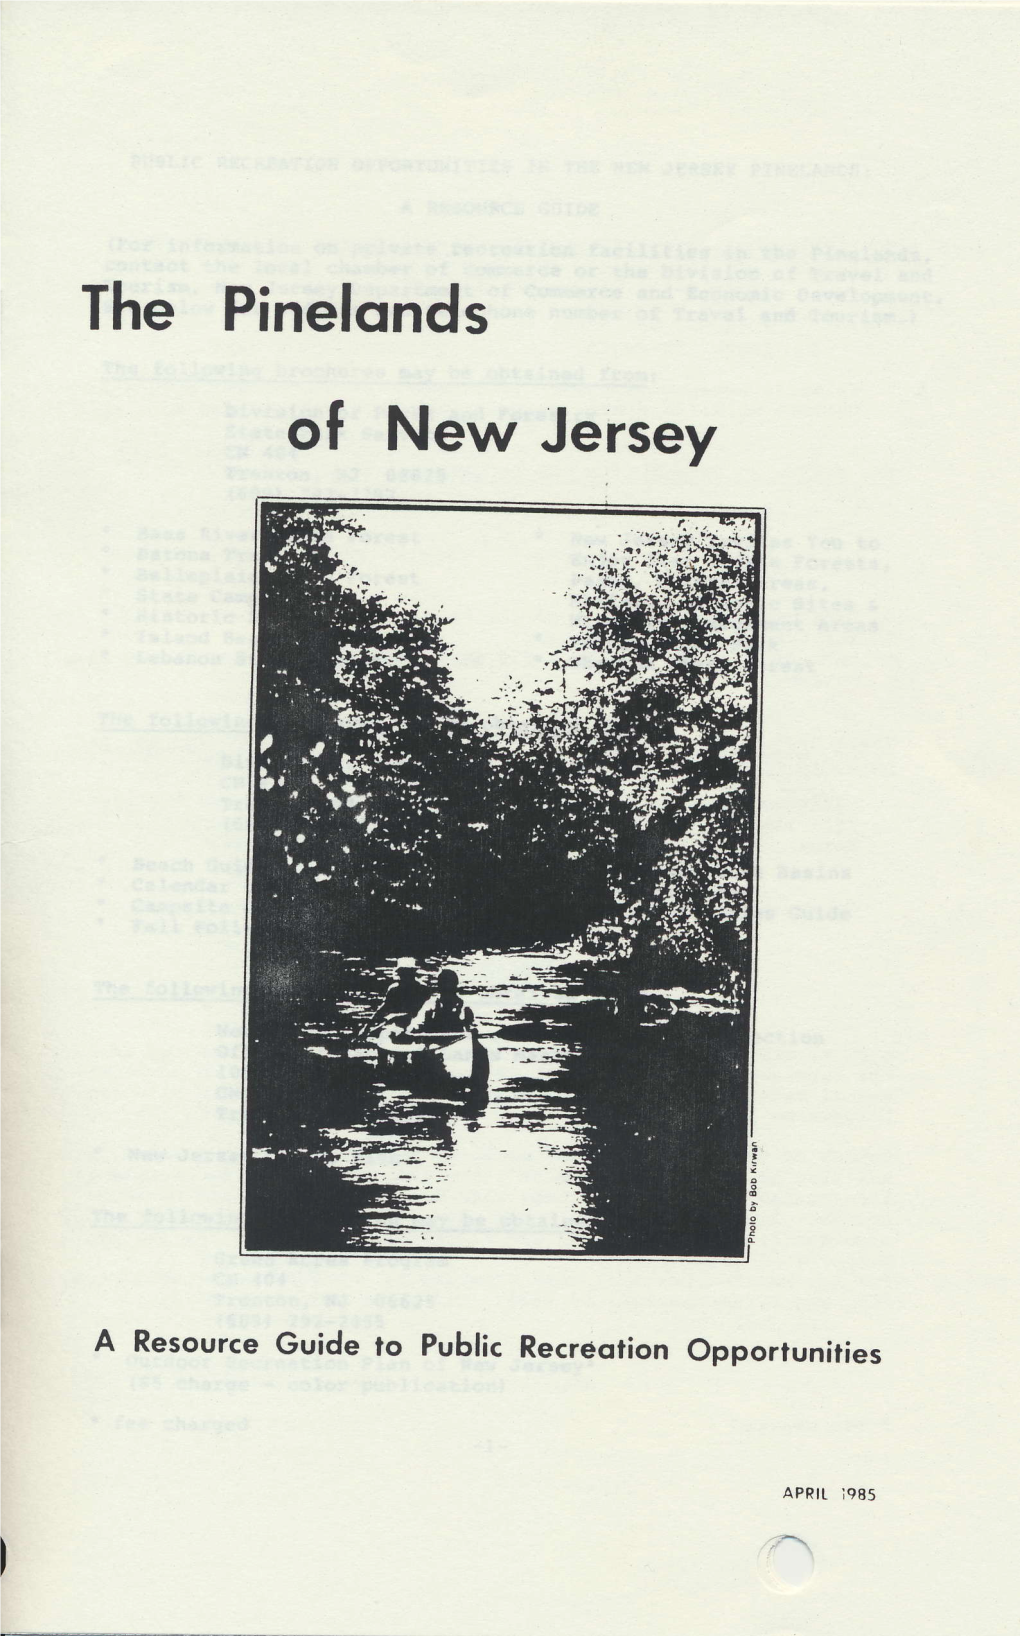 The Pinelqnds of New Jersey